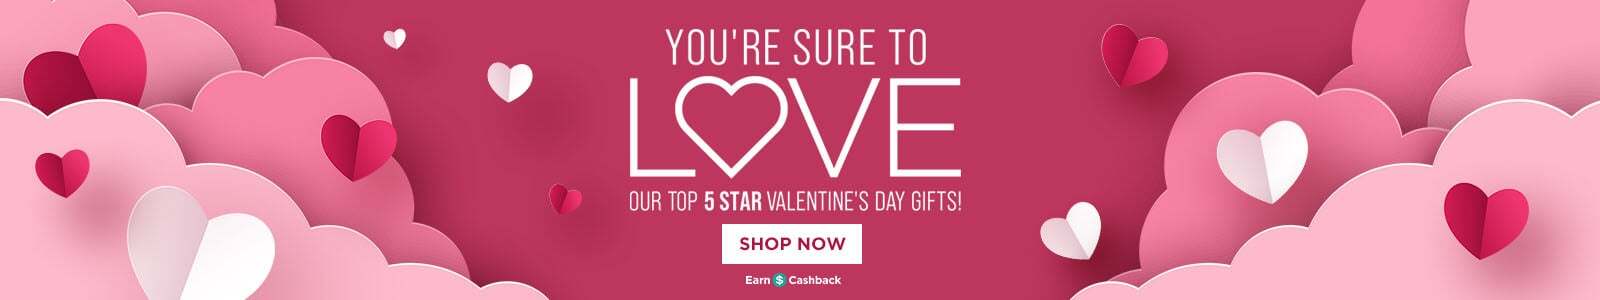 You're sure to LOVE our top 5 star Valentine's Day gifts! Shop now. Earn Cashback.